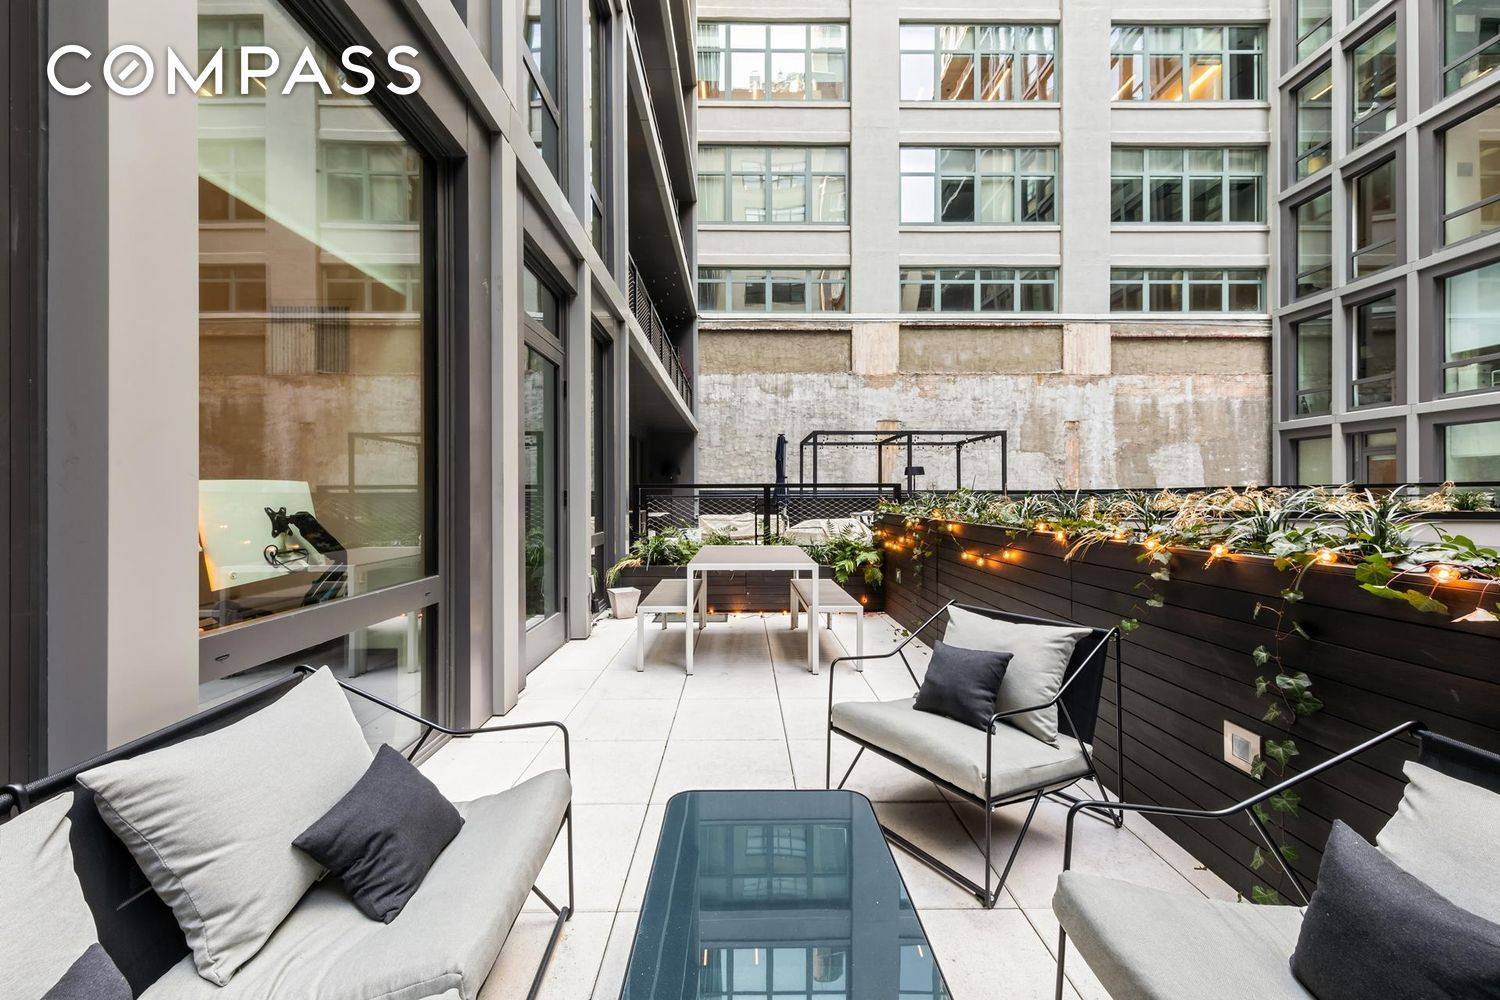 Rare 9 or 10 month lease opportunity A life of luxury awaits in this spacious one bedroom condominium unit with a private 309 square foot terrace oasis with verdant greenery ...